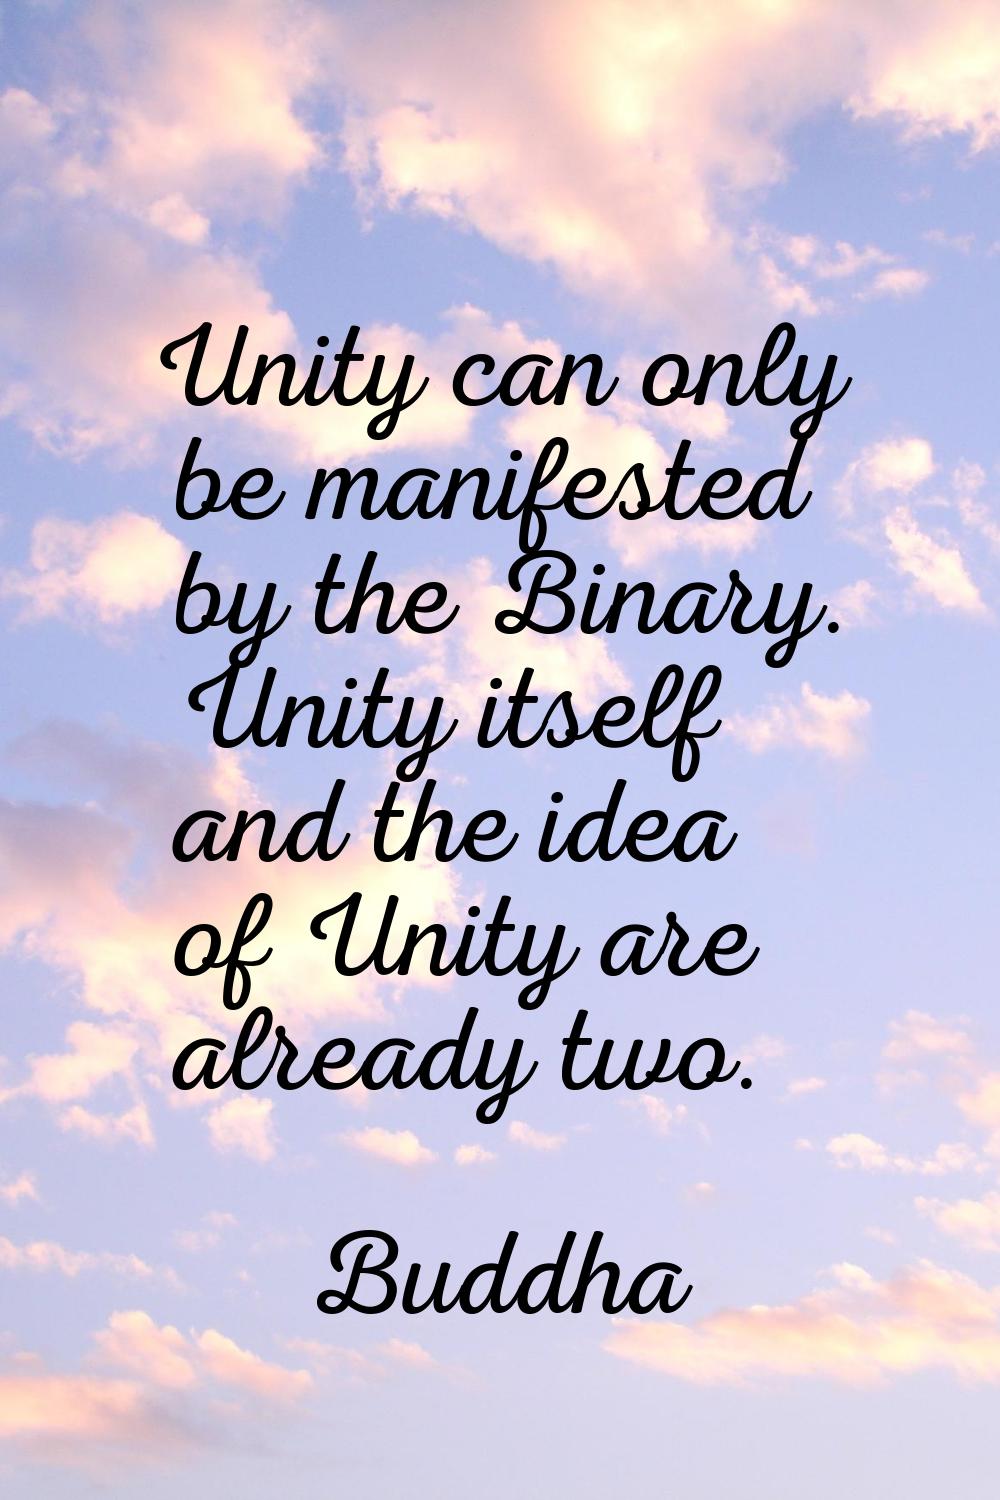 Unity can only be manifested by the Binary. Unity itself and the idea of Unity are already two.